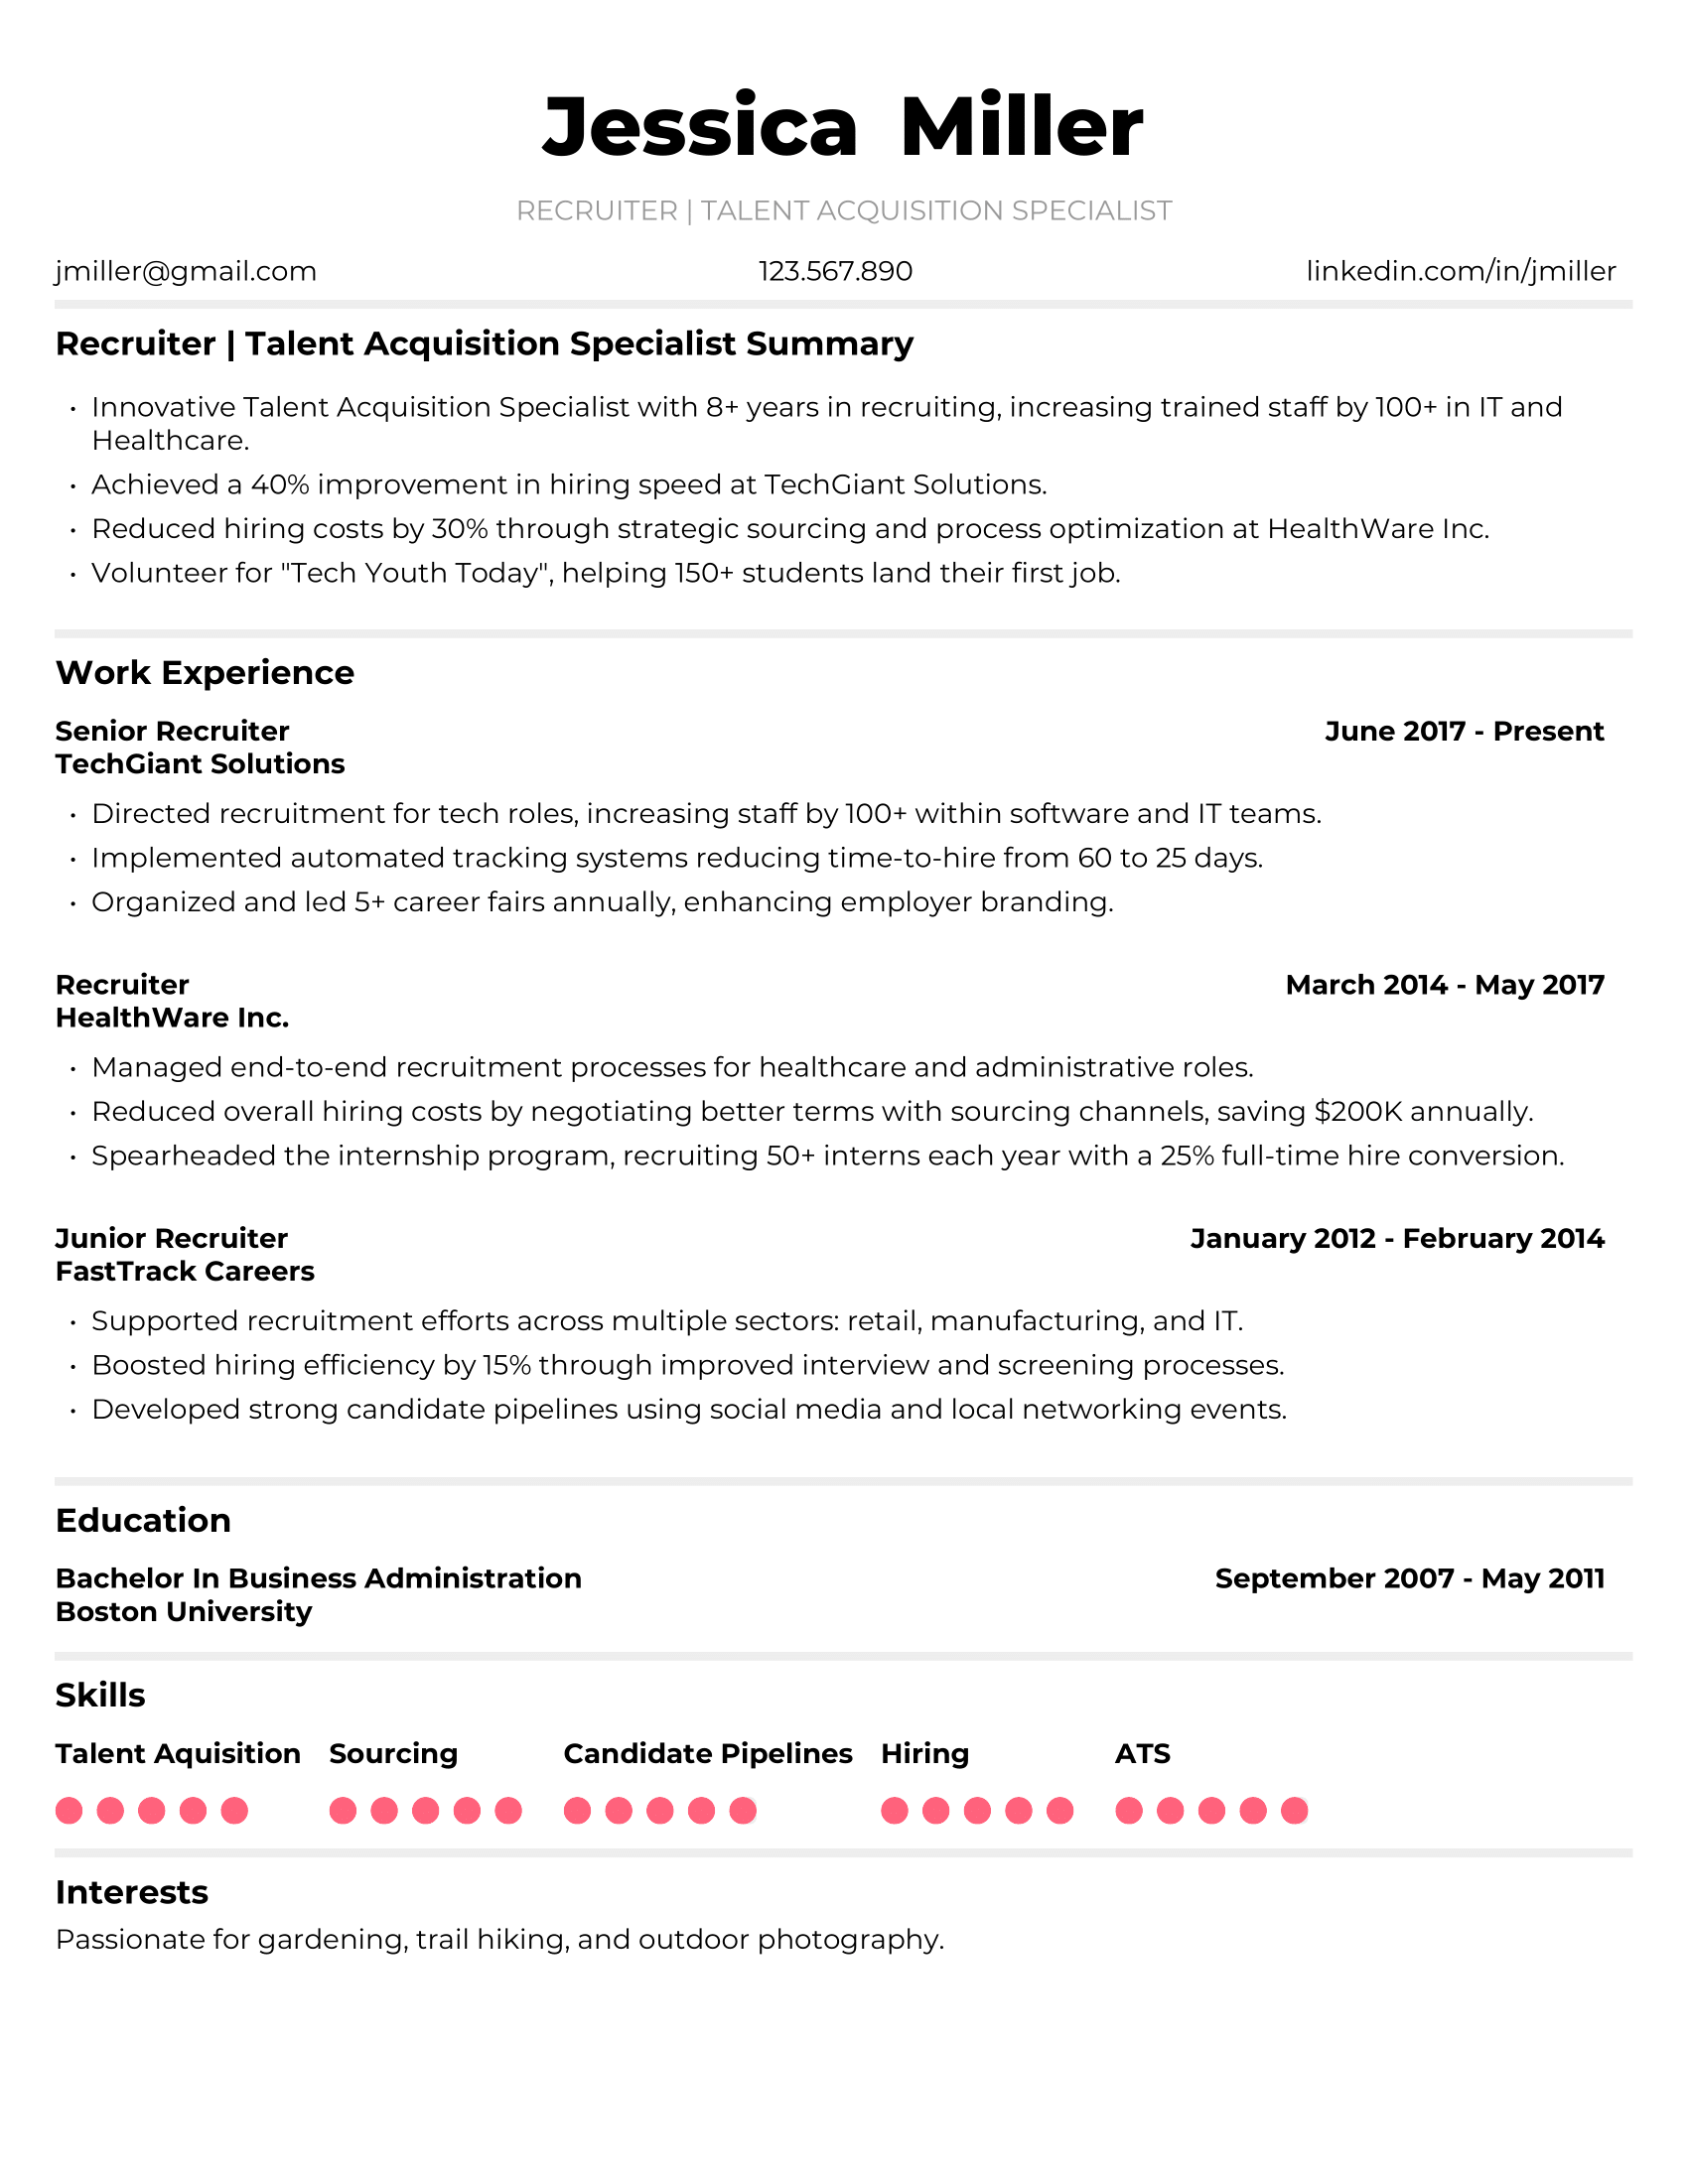 Recruiter Resume Example #1 - Traditional Background